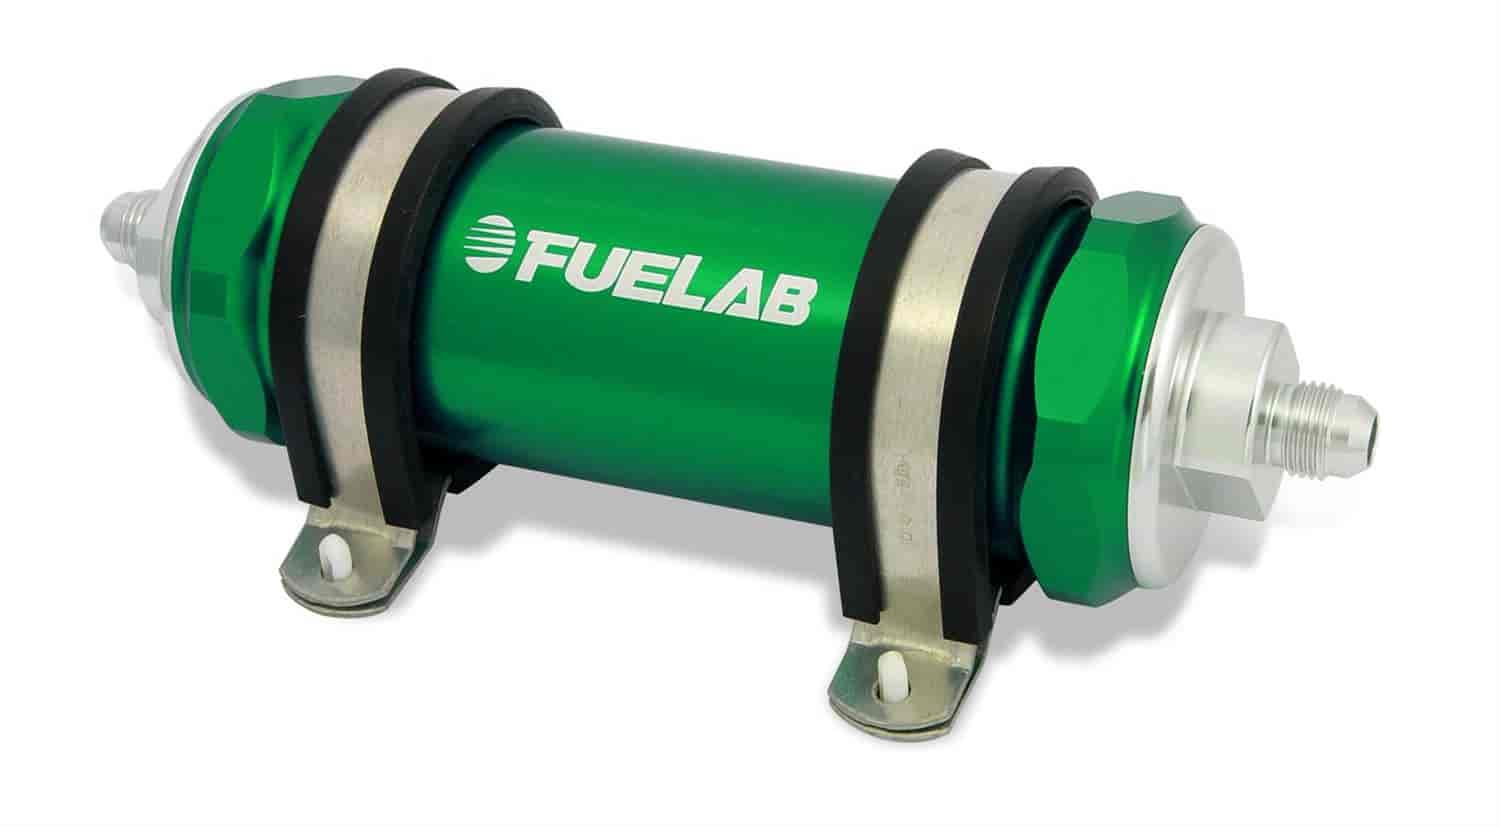 In-Line Fuel Filter Long Length -12AN Inlet/-8AN Outlet 75 micron stainless steel element